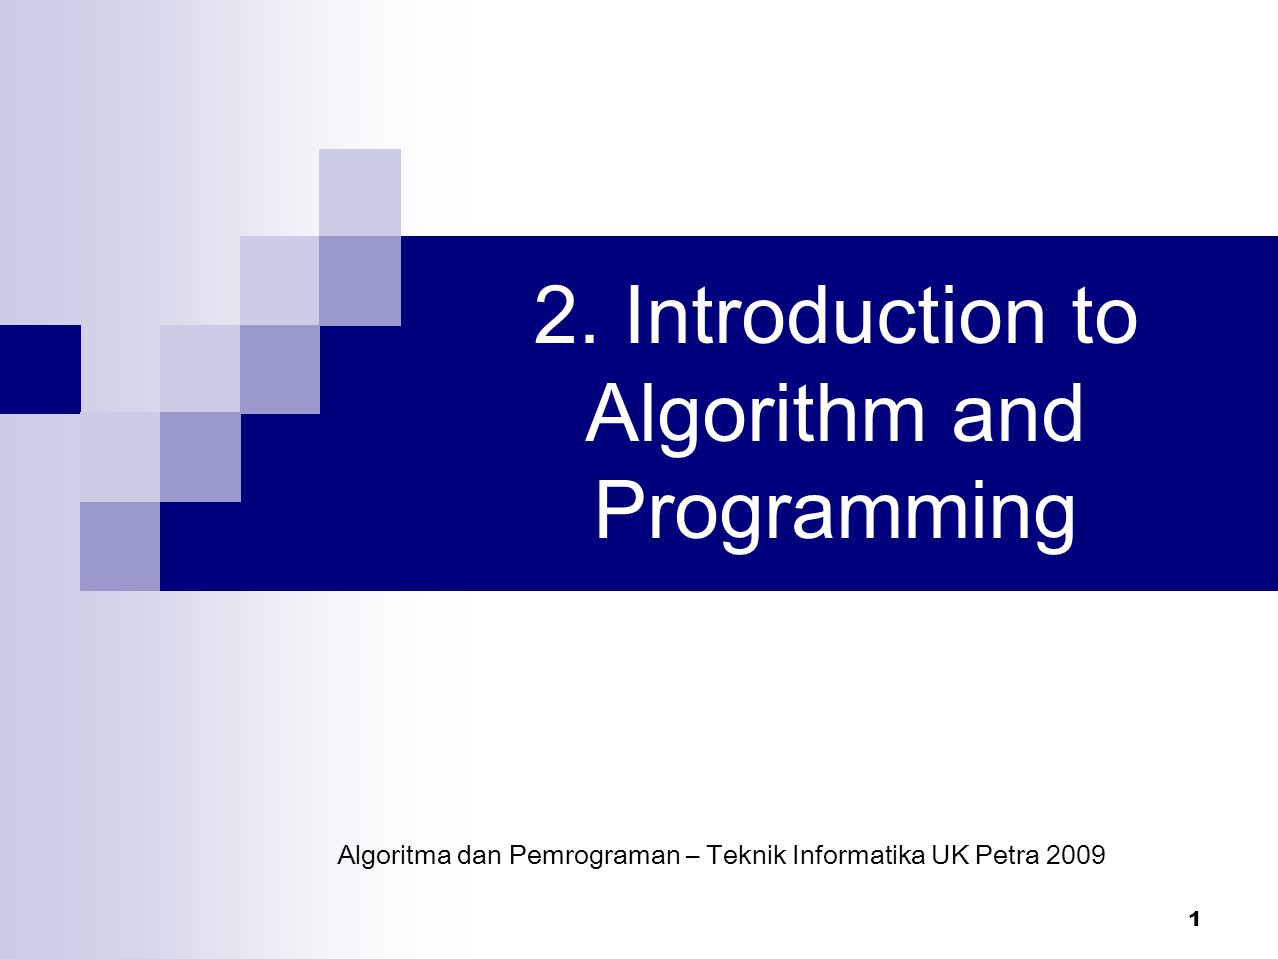 2. Introduction to Algorithm and Programming